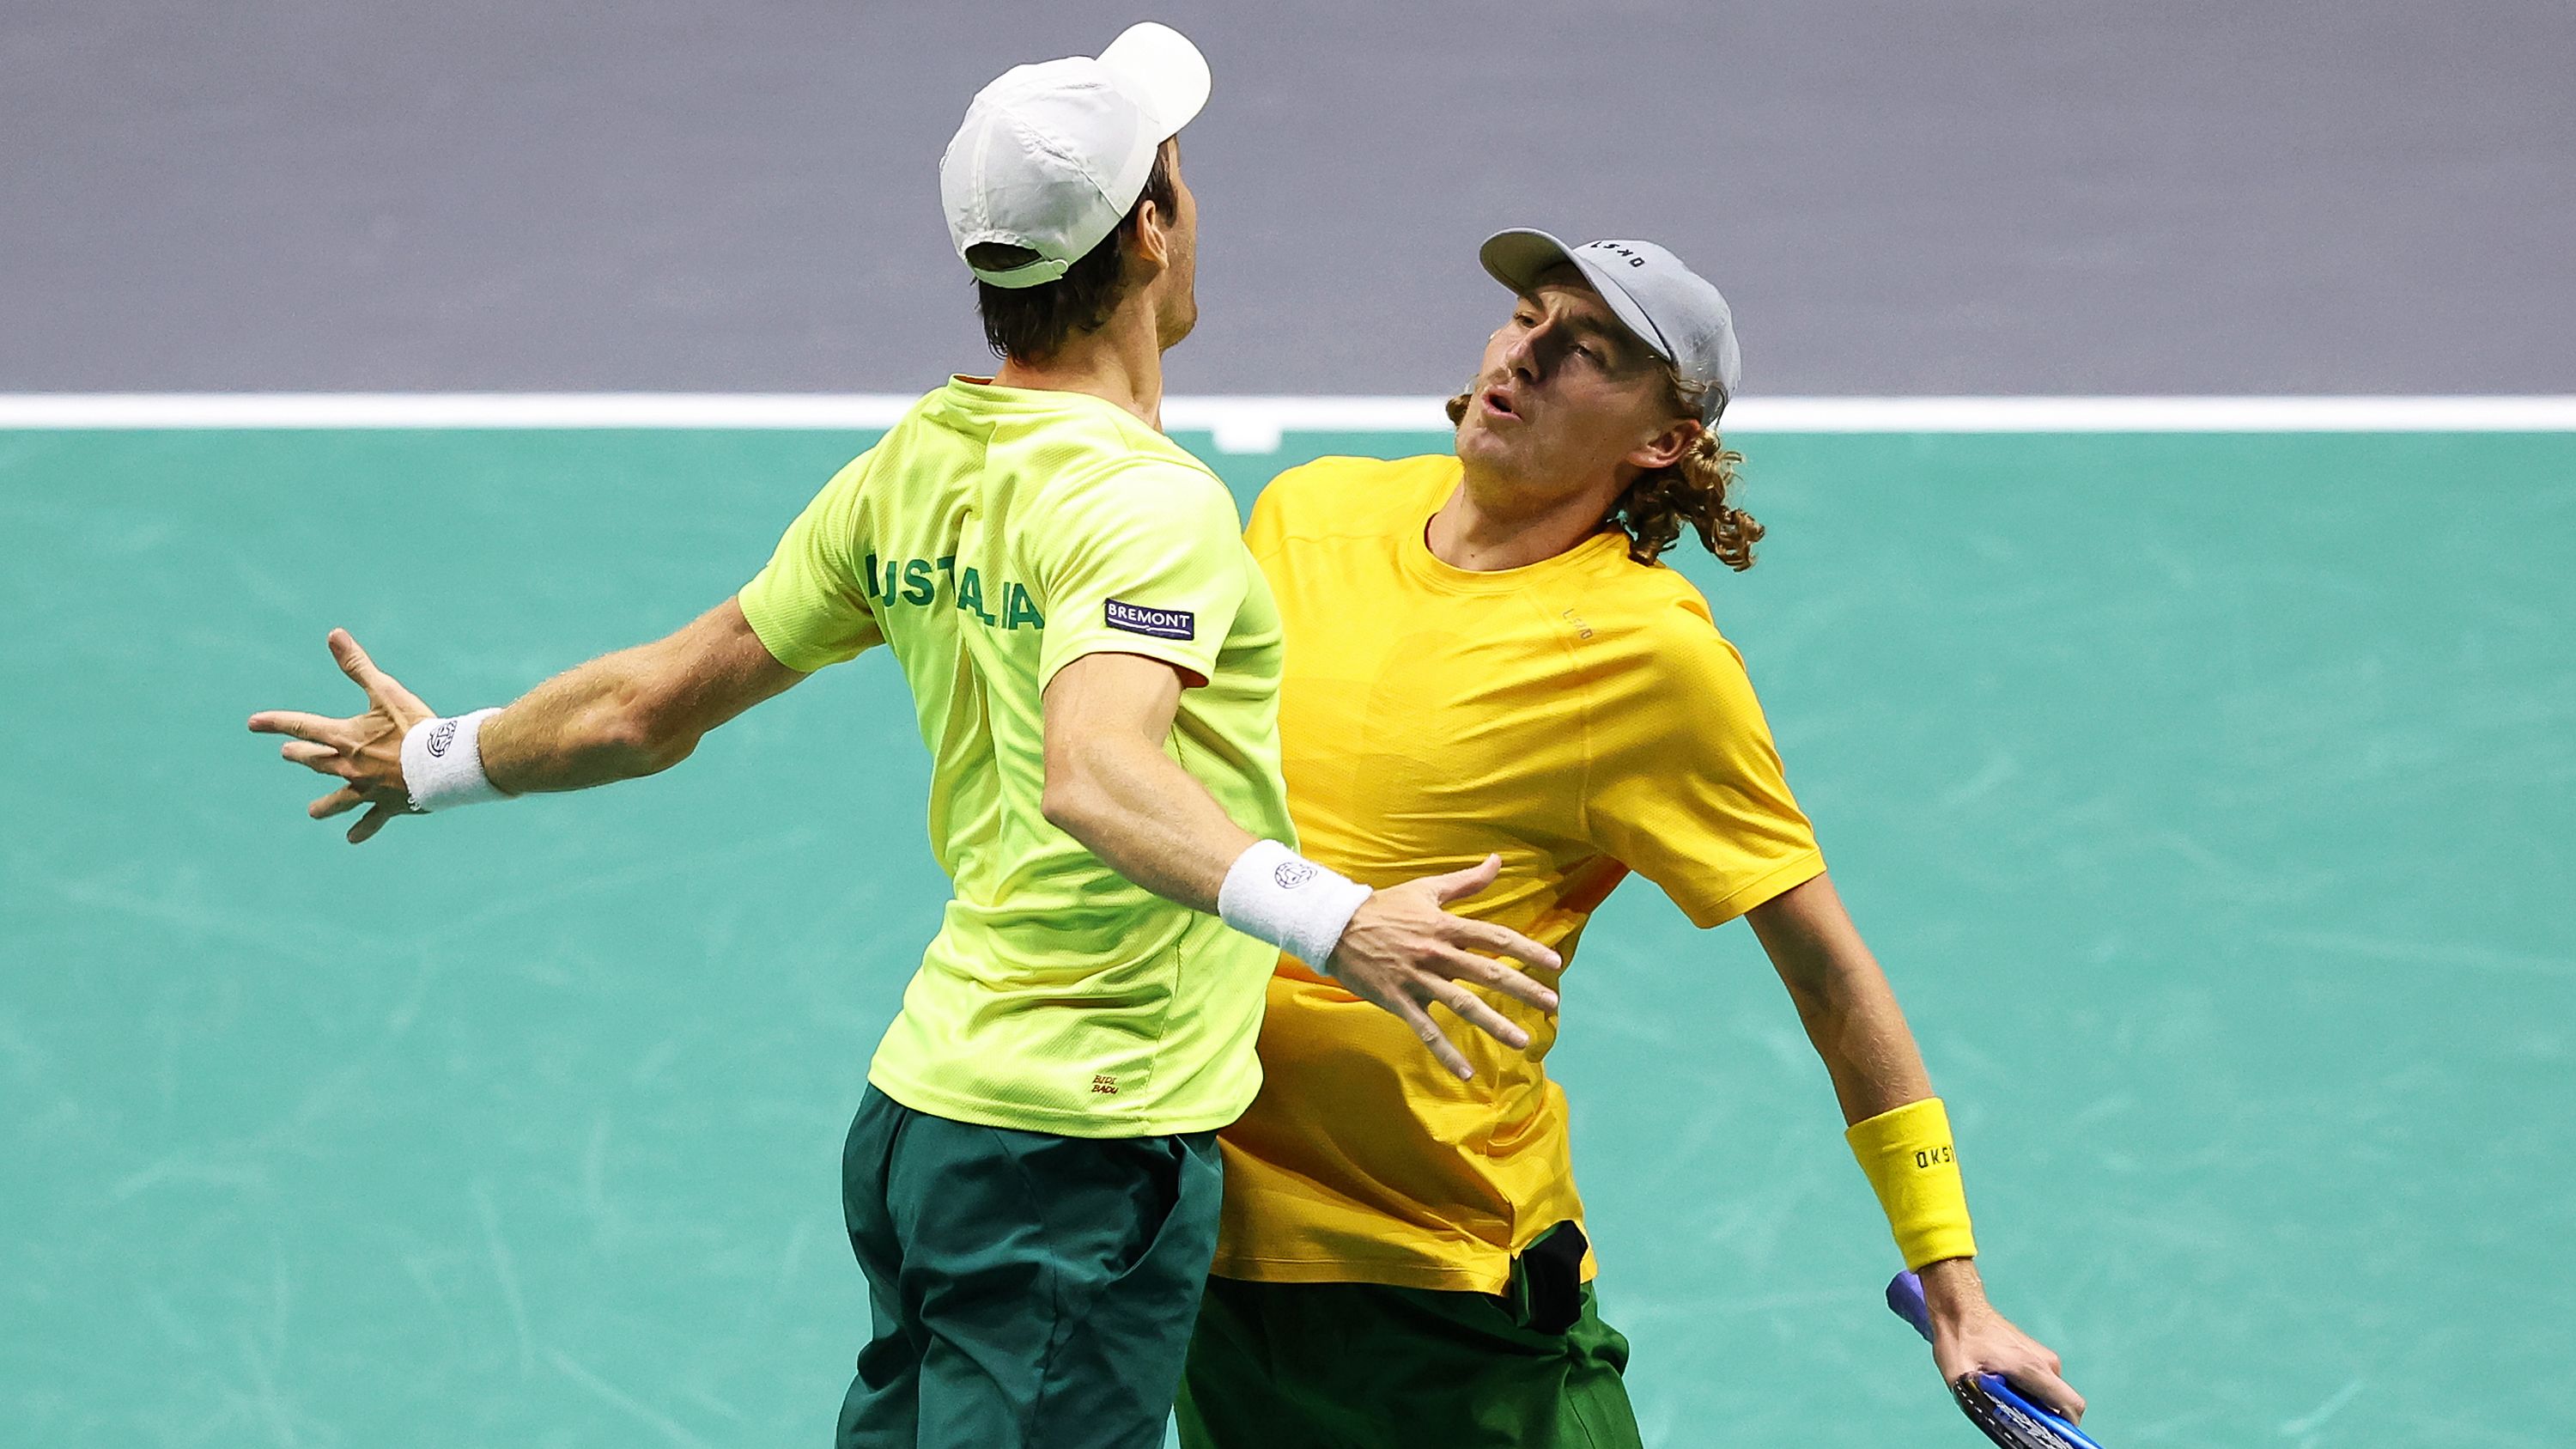 Matthew Ebden and Max Purcell of Team Australia celebrate with a chest bump after winning the doubles match against Edouard Roger-Vasselin and Nicolas Mahut (not pictured) winning a point during the Davis Cup Finals Group Stage match between France and Australia at AO Arena on September 14, 2023 in Manchester, England. (Photo by Matt McNulty/Getty Images for ITF)